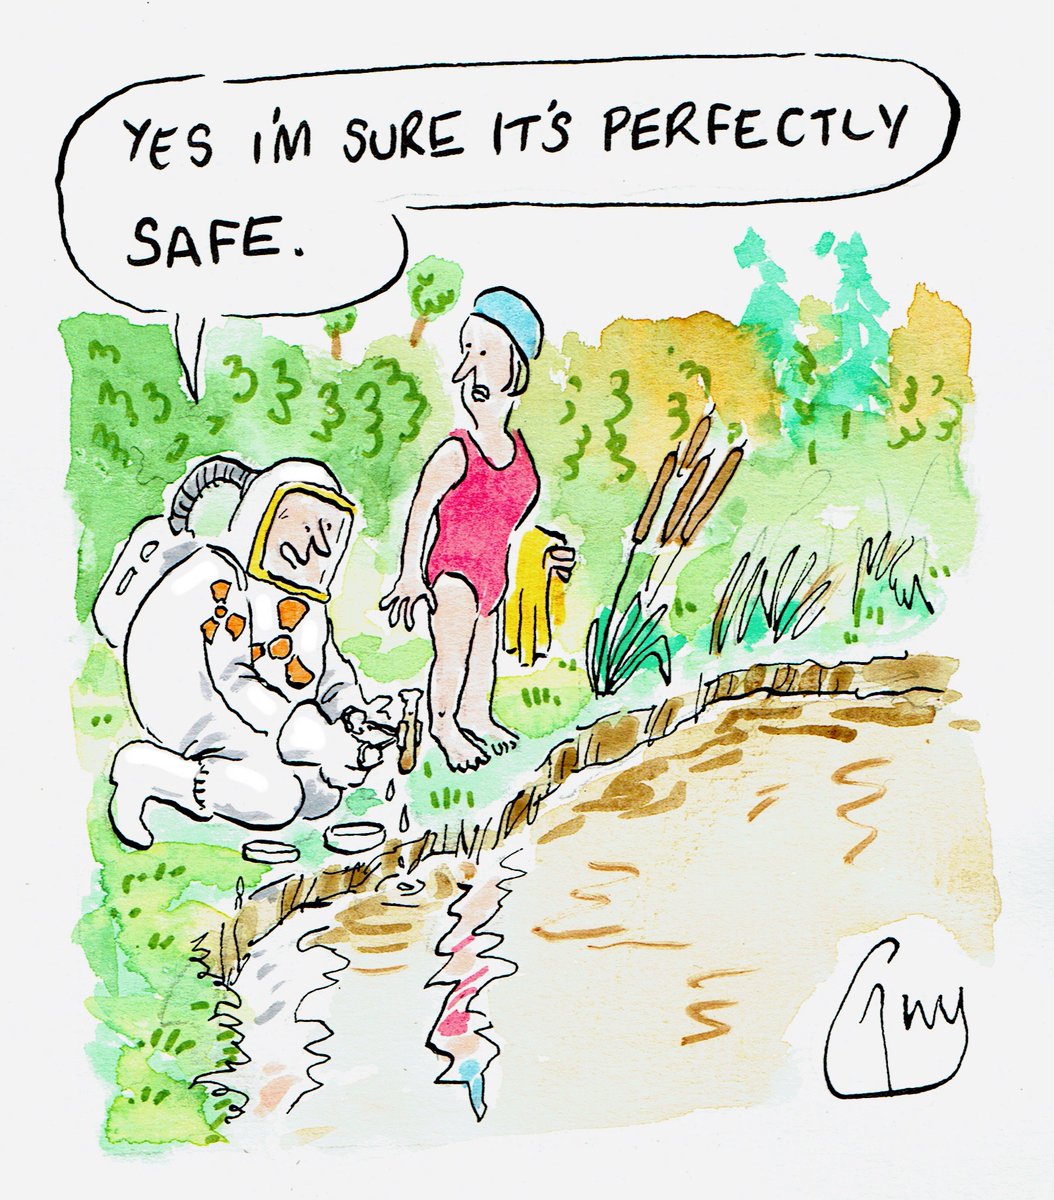 My cartoon for Monday's @MetroUK @MetroPicDesk #wildswimming #sewage #environmentagency #water #rivers #waterquality